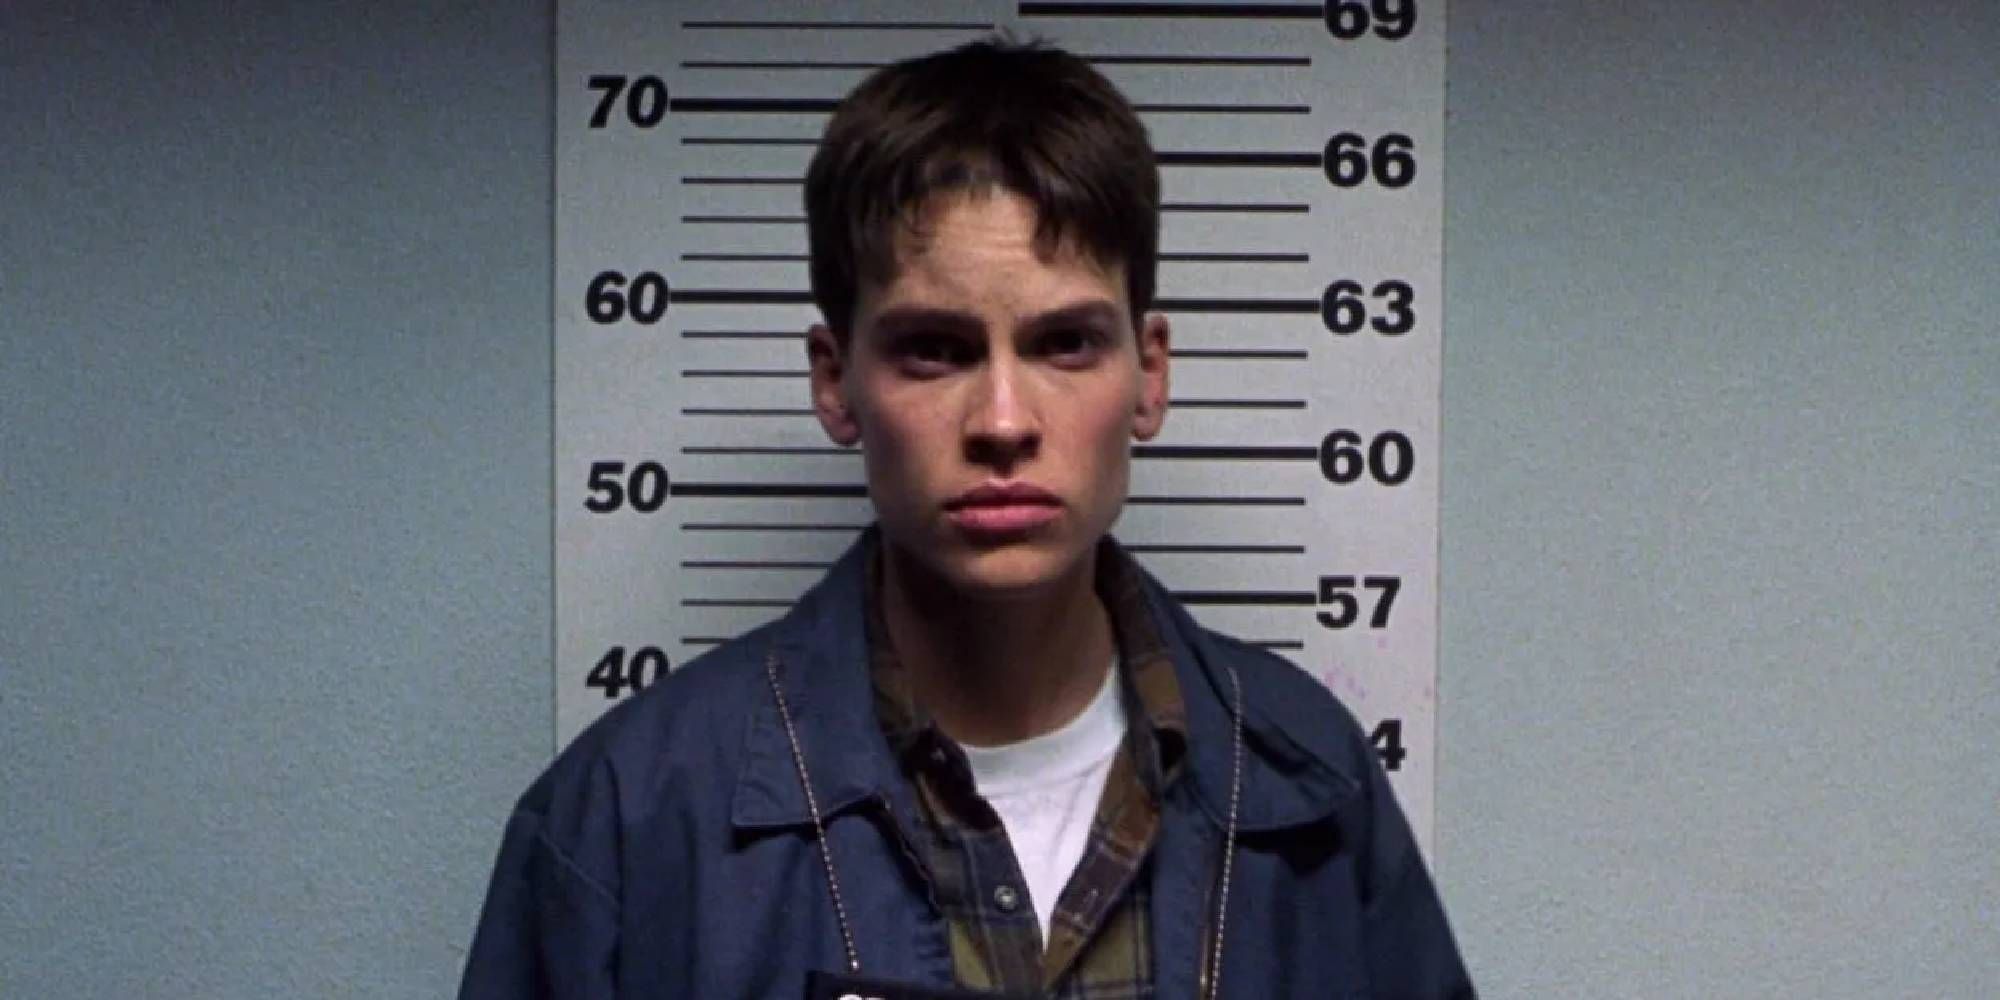 Hilary Swank mugshot in Boys Don't Cry looking serious.